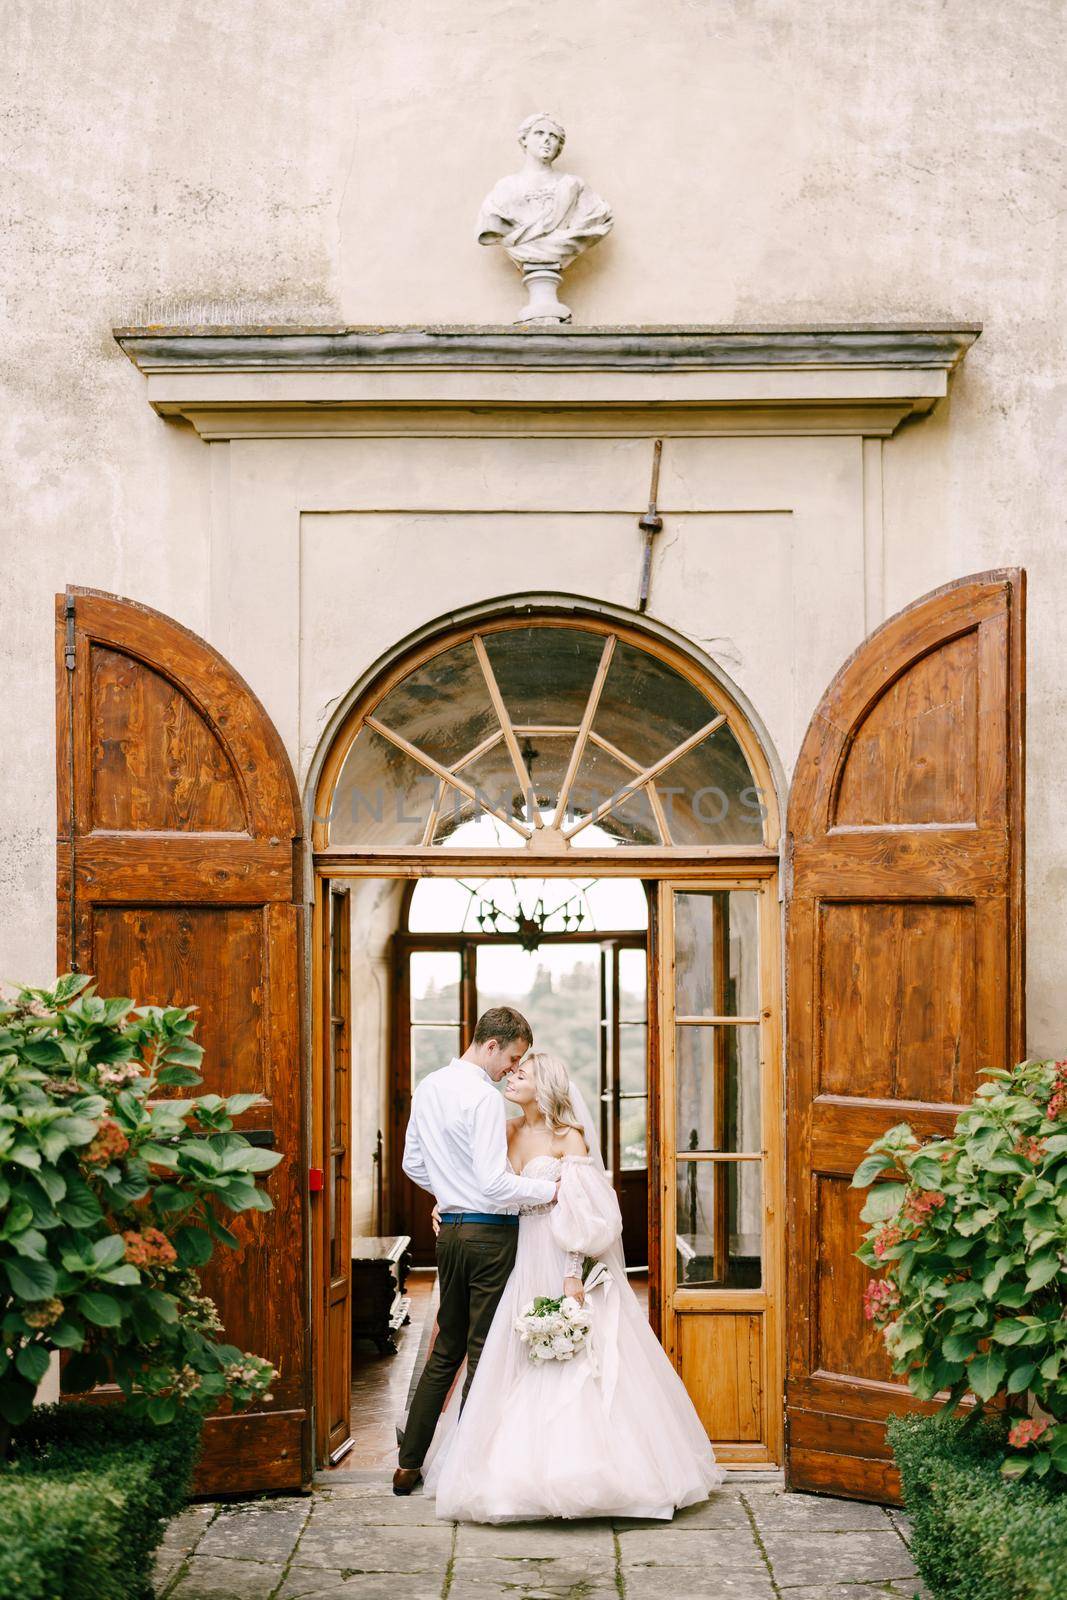 Wedding at an old winery villa in Tuscany, Italy. A wedding couple stands near the old wooden doors at the villa-winery.